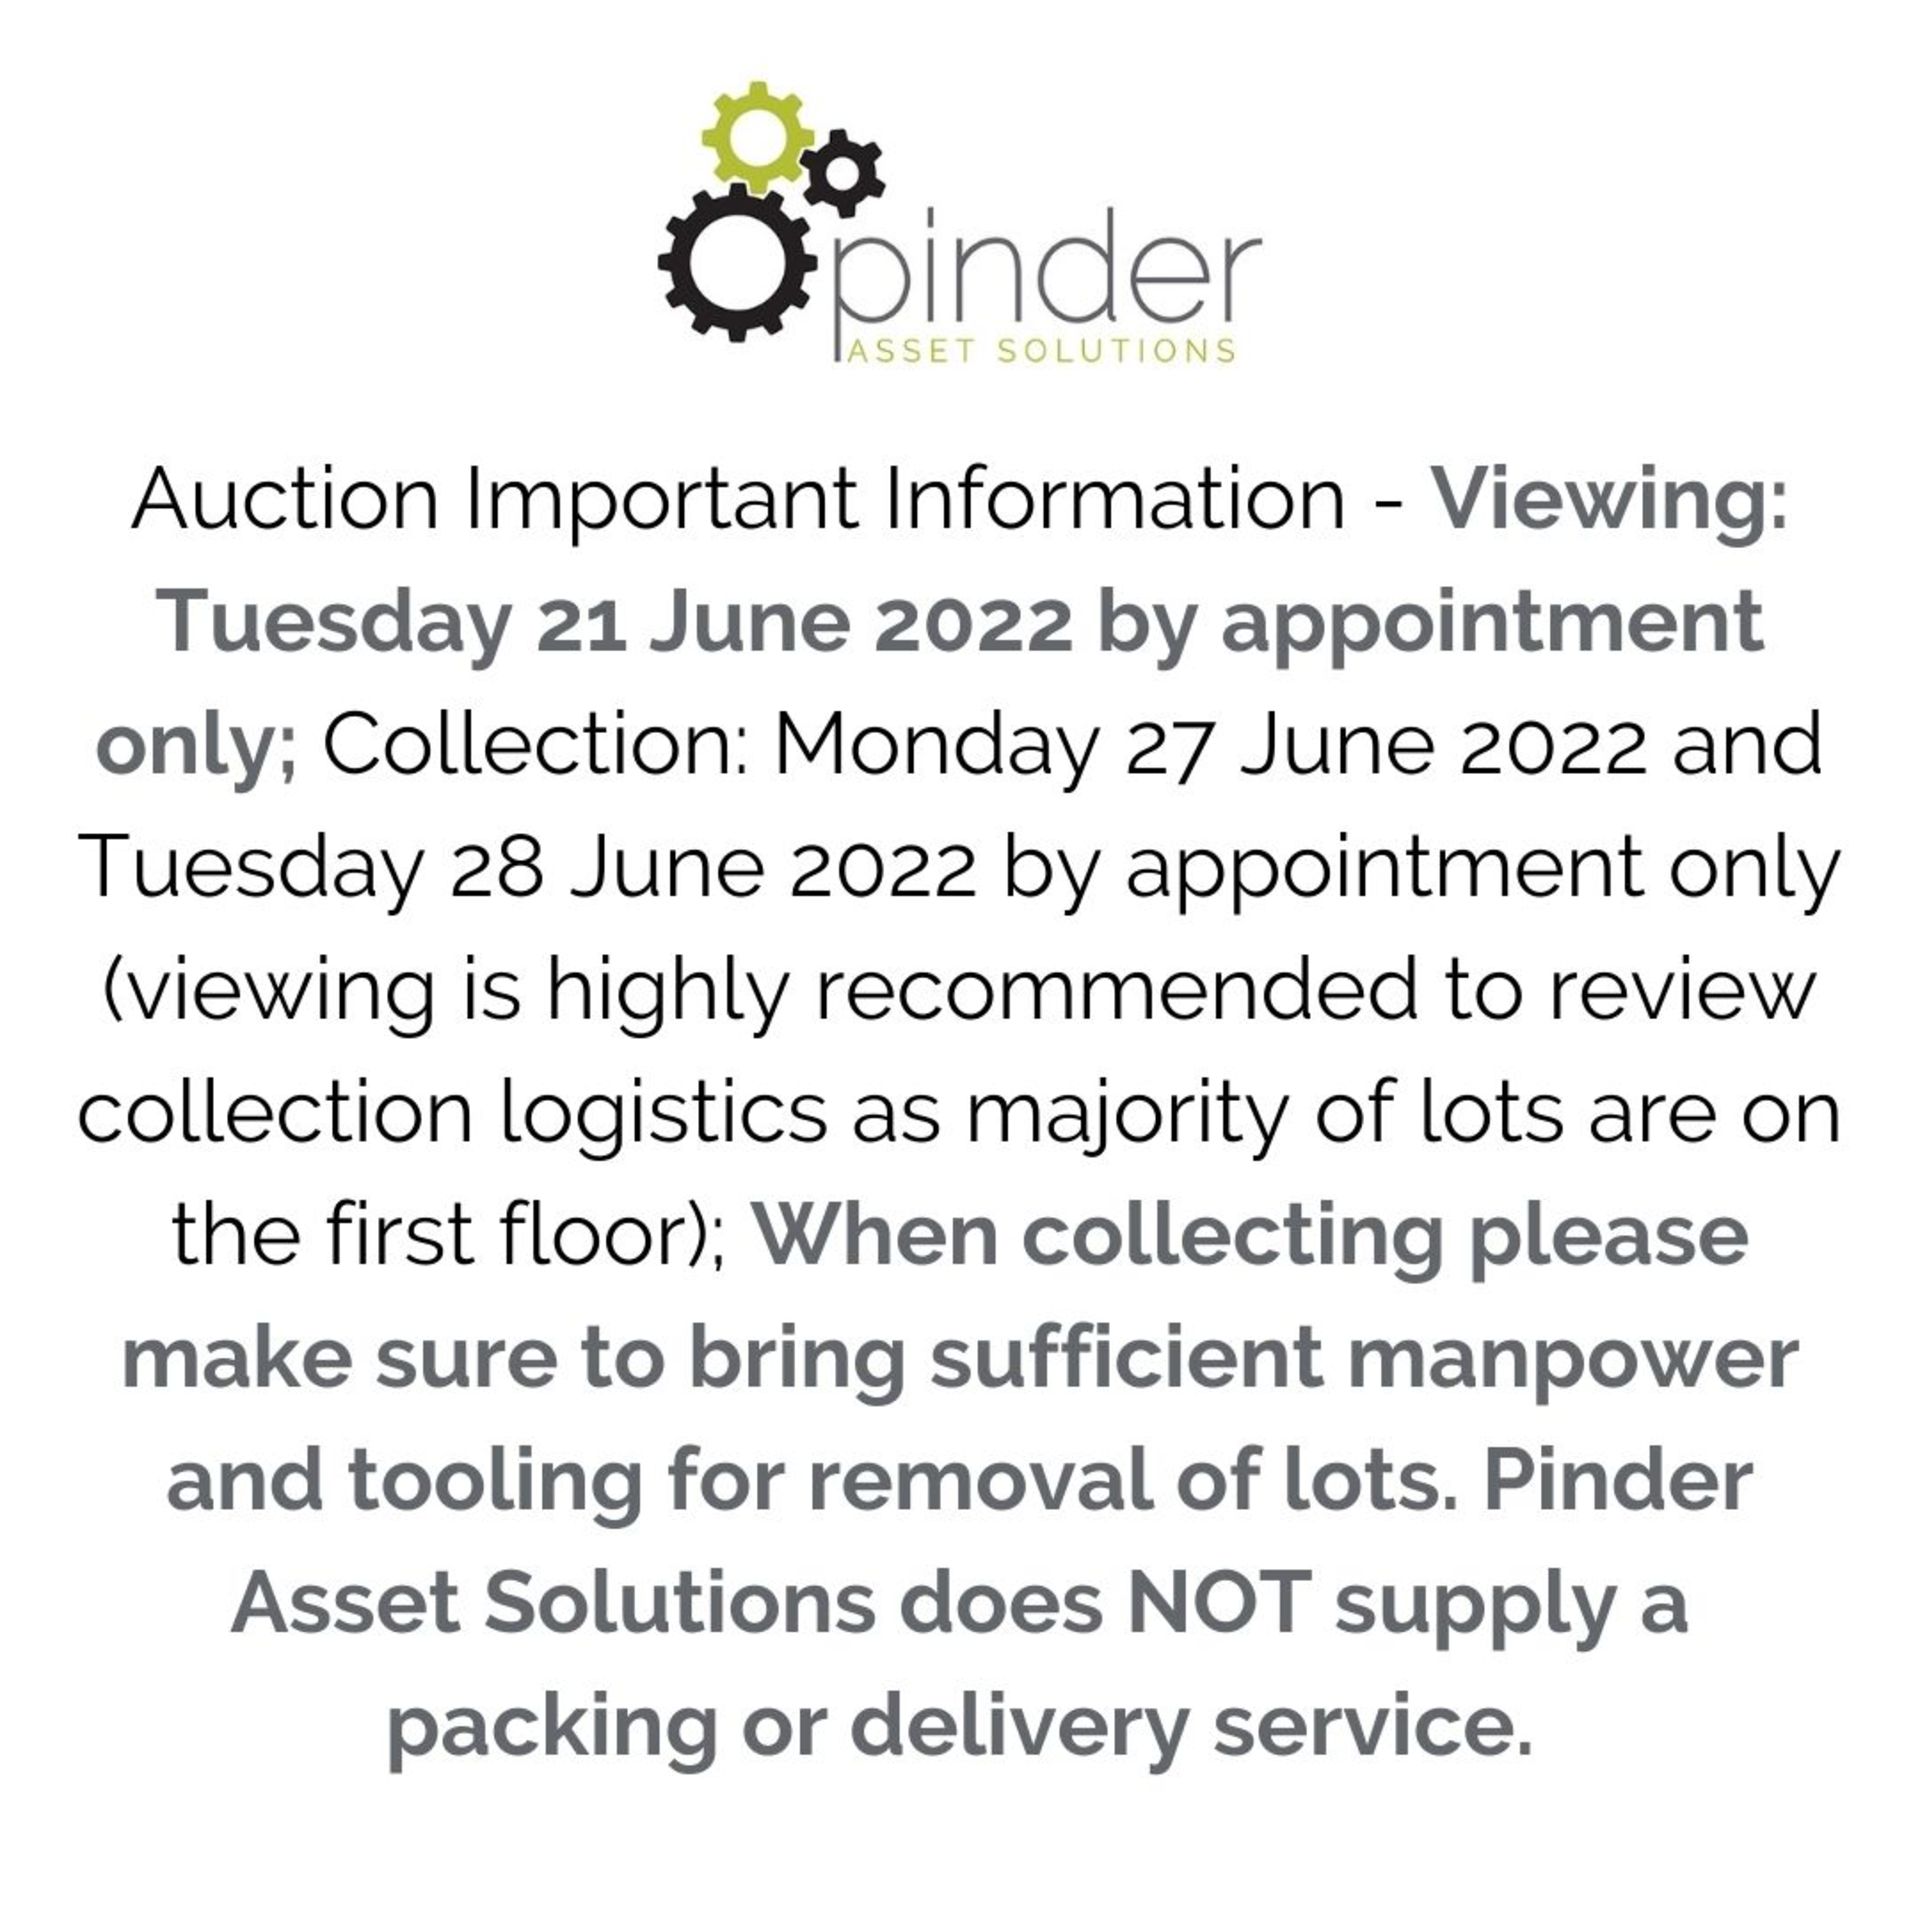 Auction Important Information - Viewing: Tuesday 21 June 2022 by appointment only; Collection: